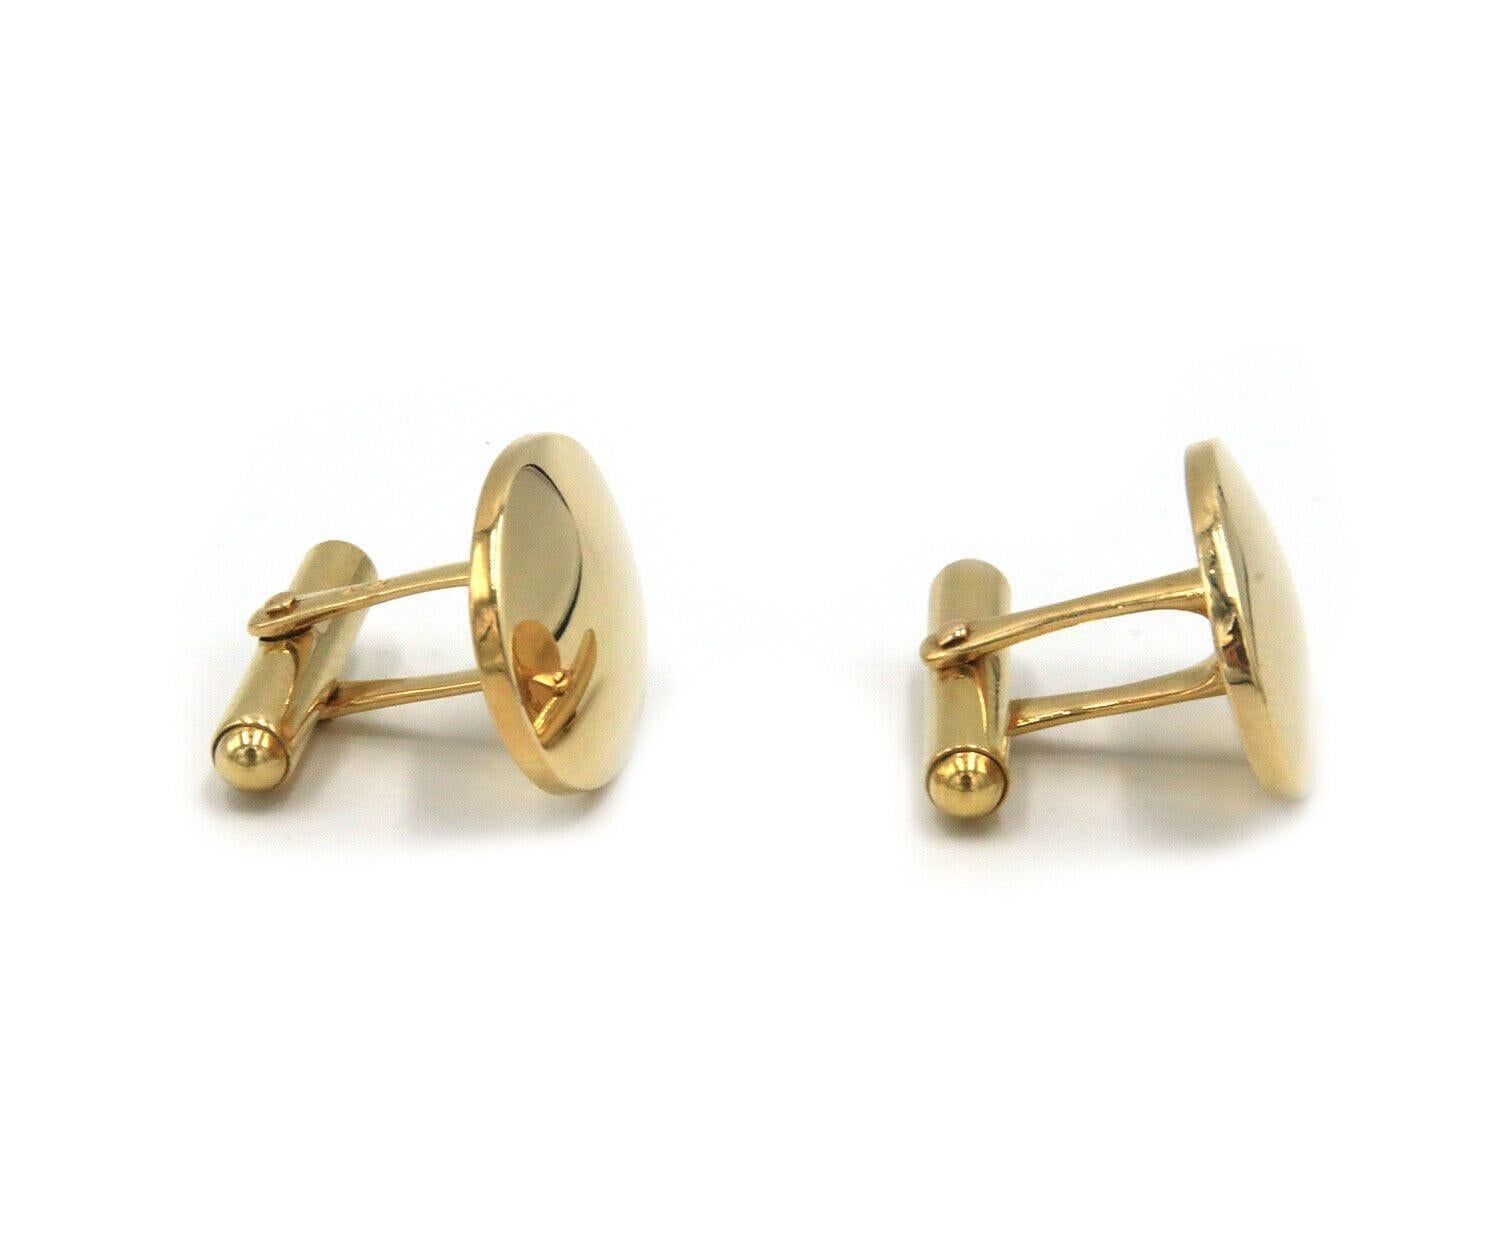 Polished Oval Cufflinks in 14K Yellow Gold In Excellent Condition For Sale In Vienna, VA